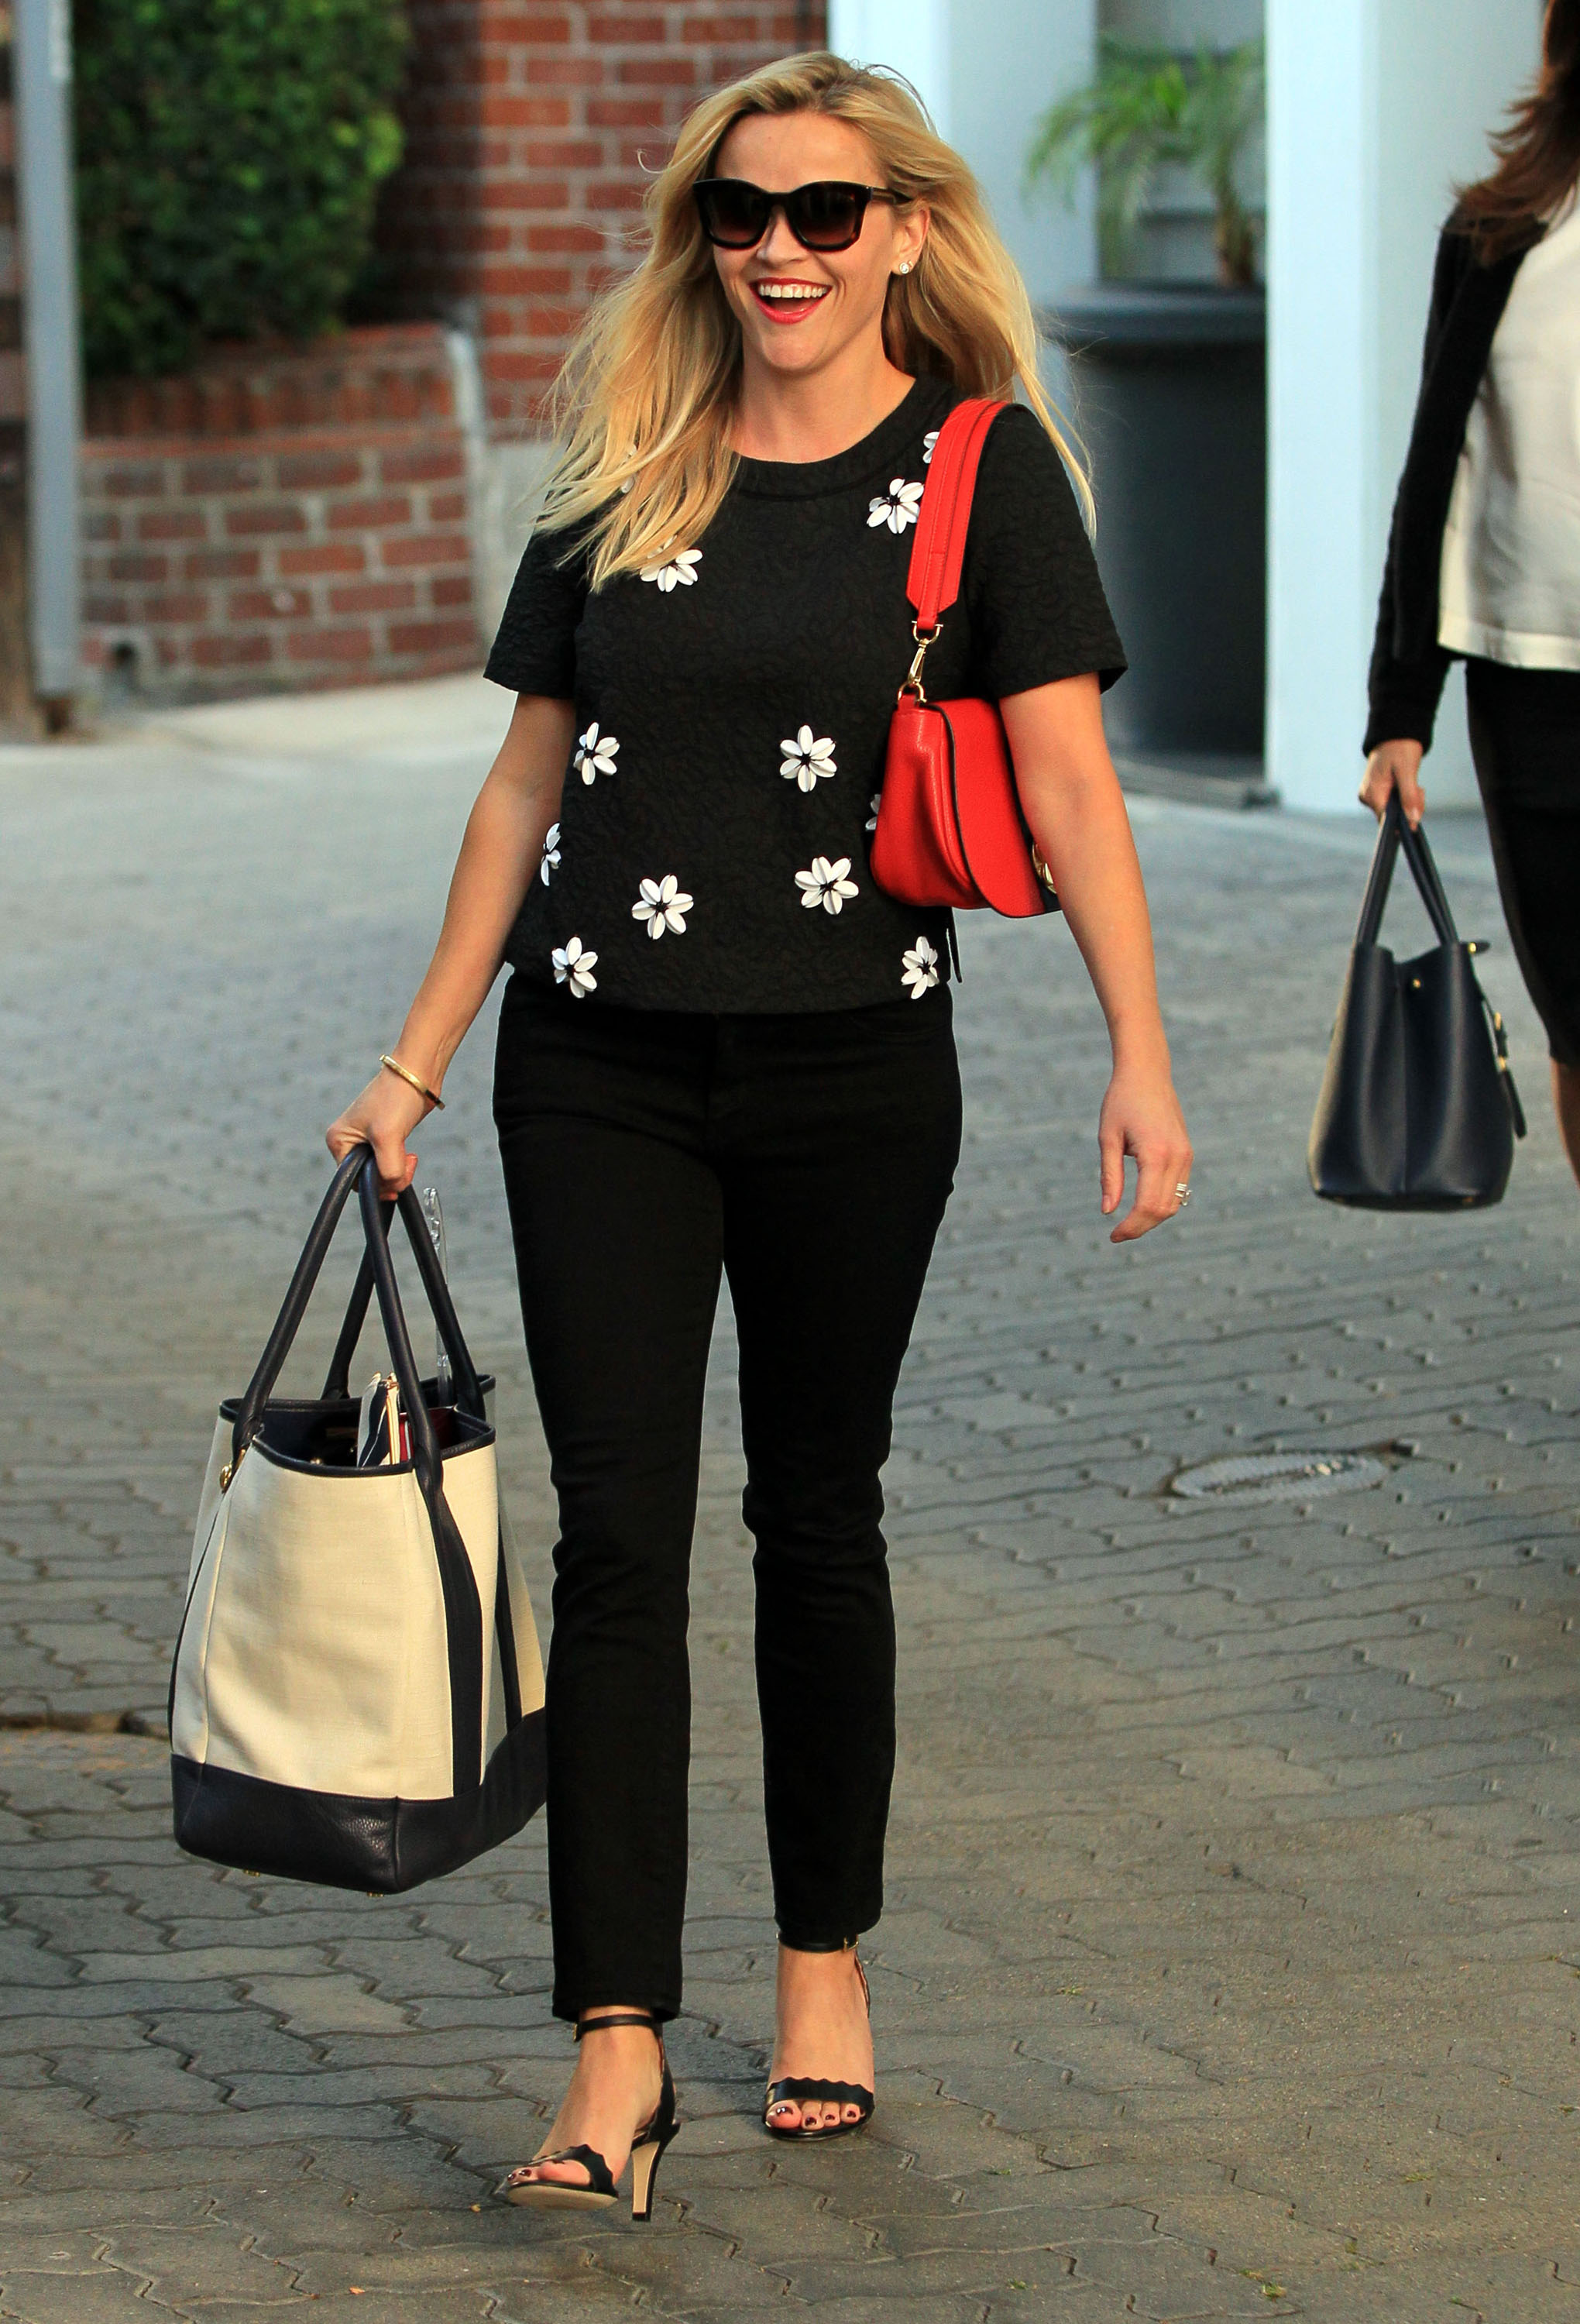 L.L.Bean - StyleBistro spotted Reese Witherspoon with a monogrammed L.L.Bean  Boat and Tote. Any guesses what LWR stands for?